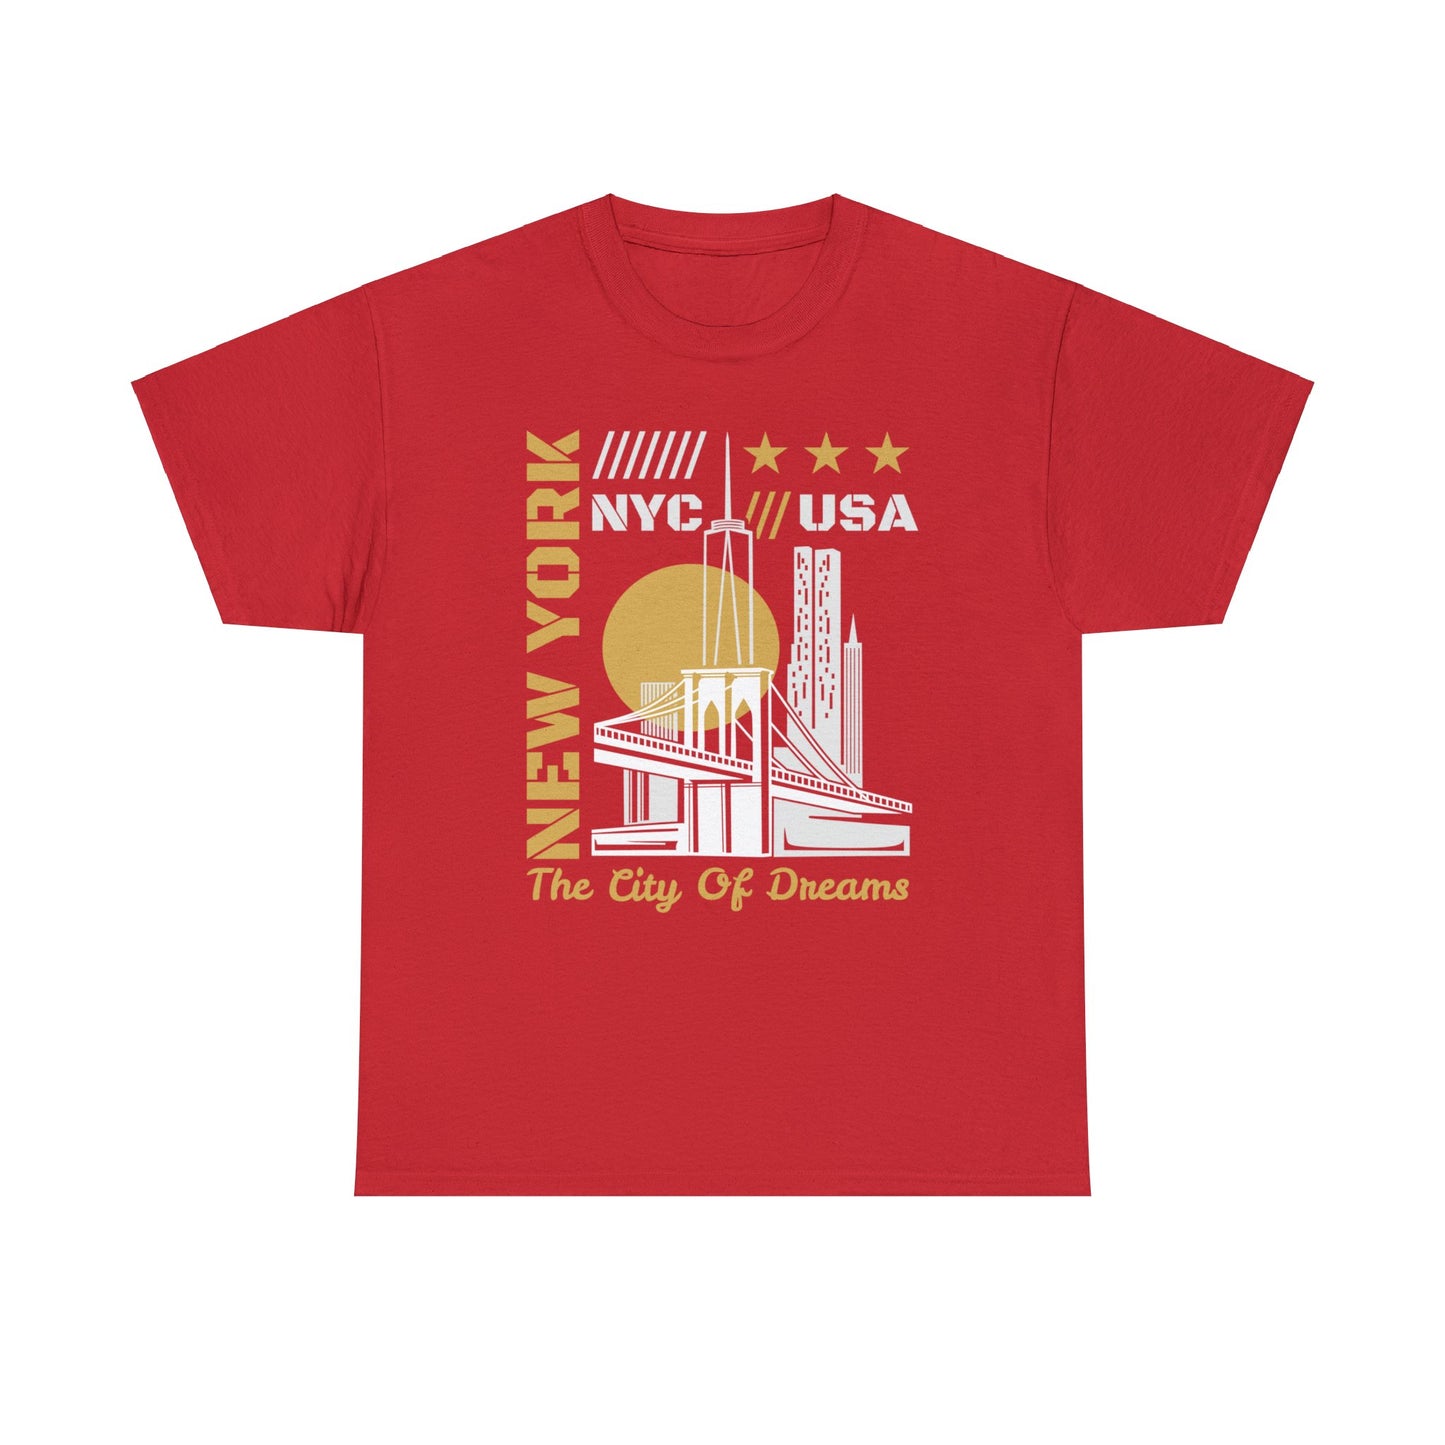 Discover the City That Never Sleeps with Our Stylish New York-Inspired T-Shirt